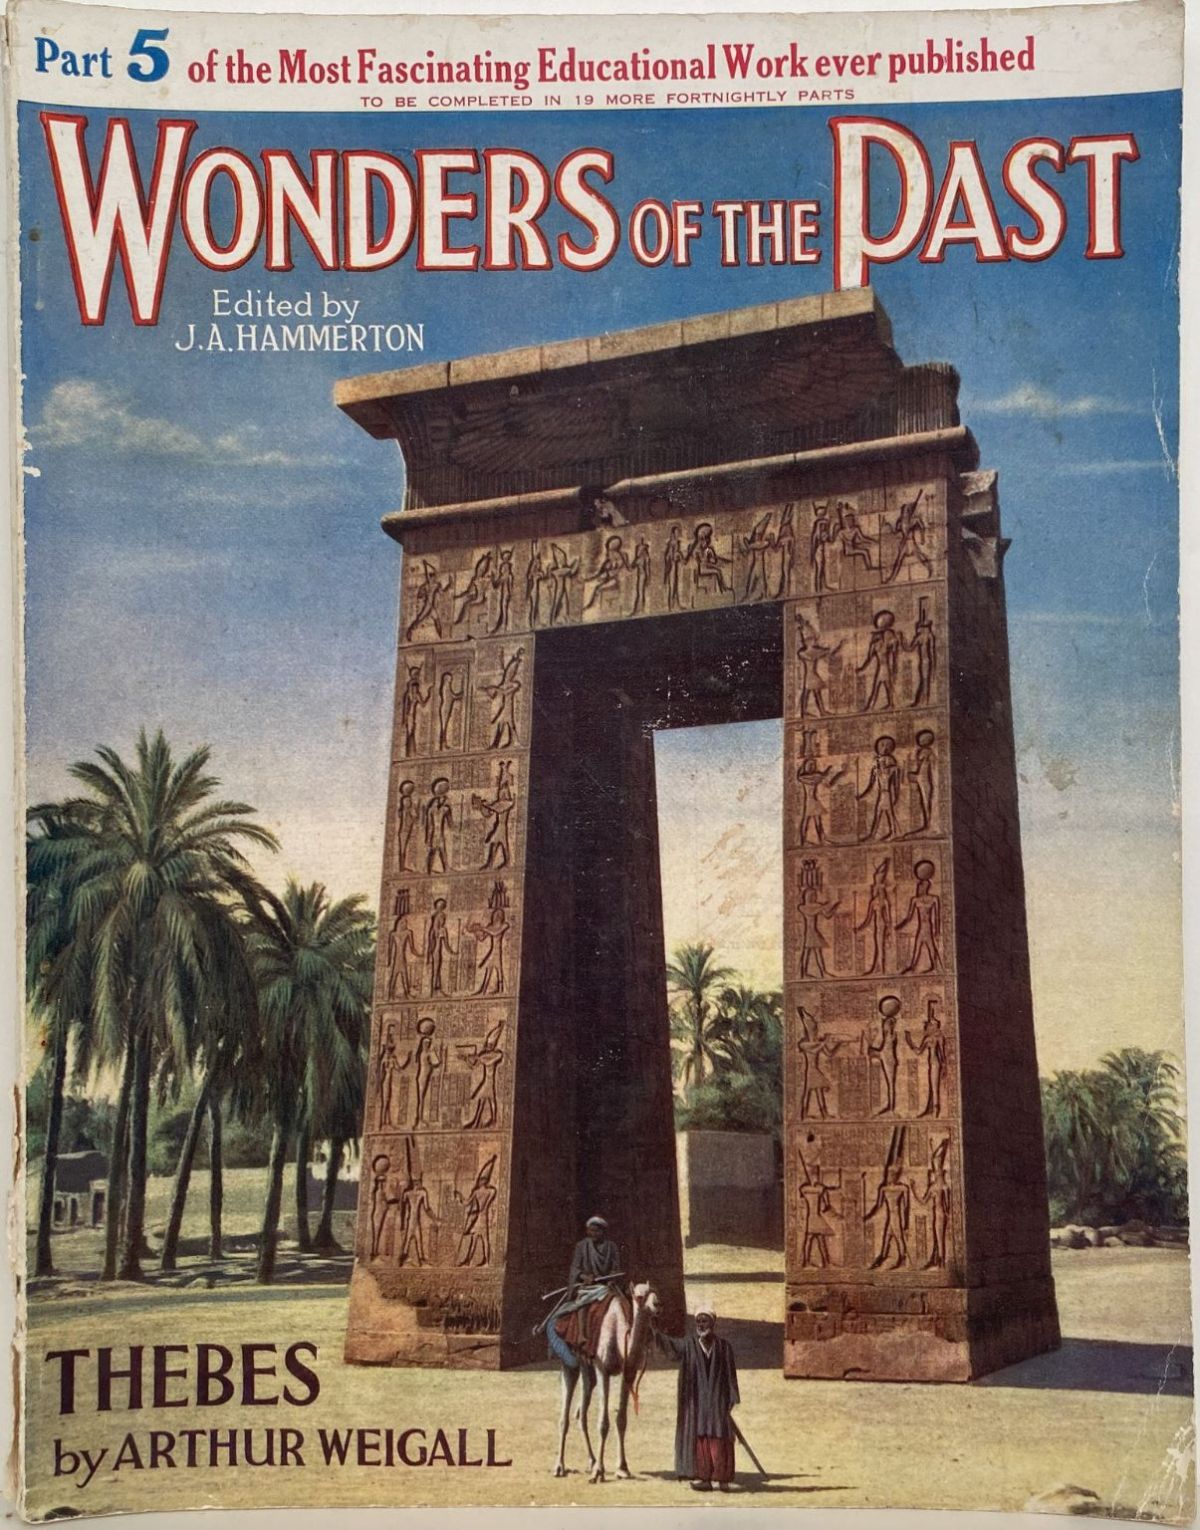 WONDERS of the PAST: Part 5